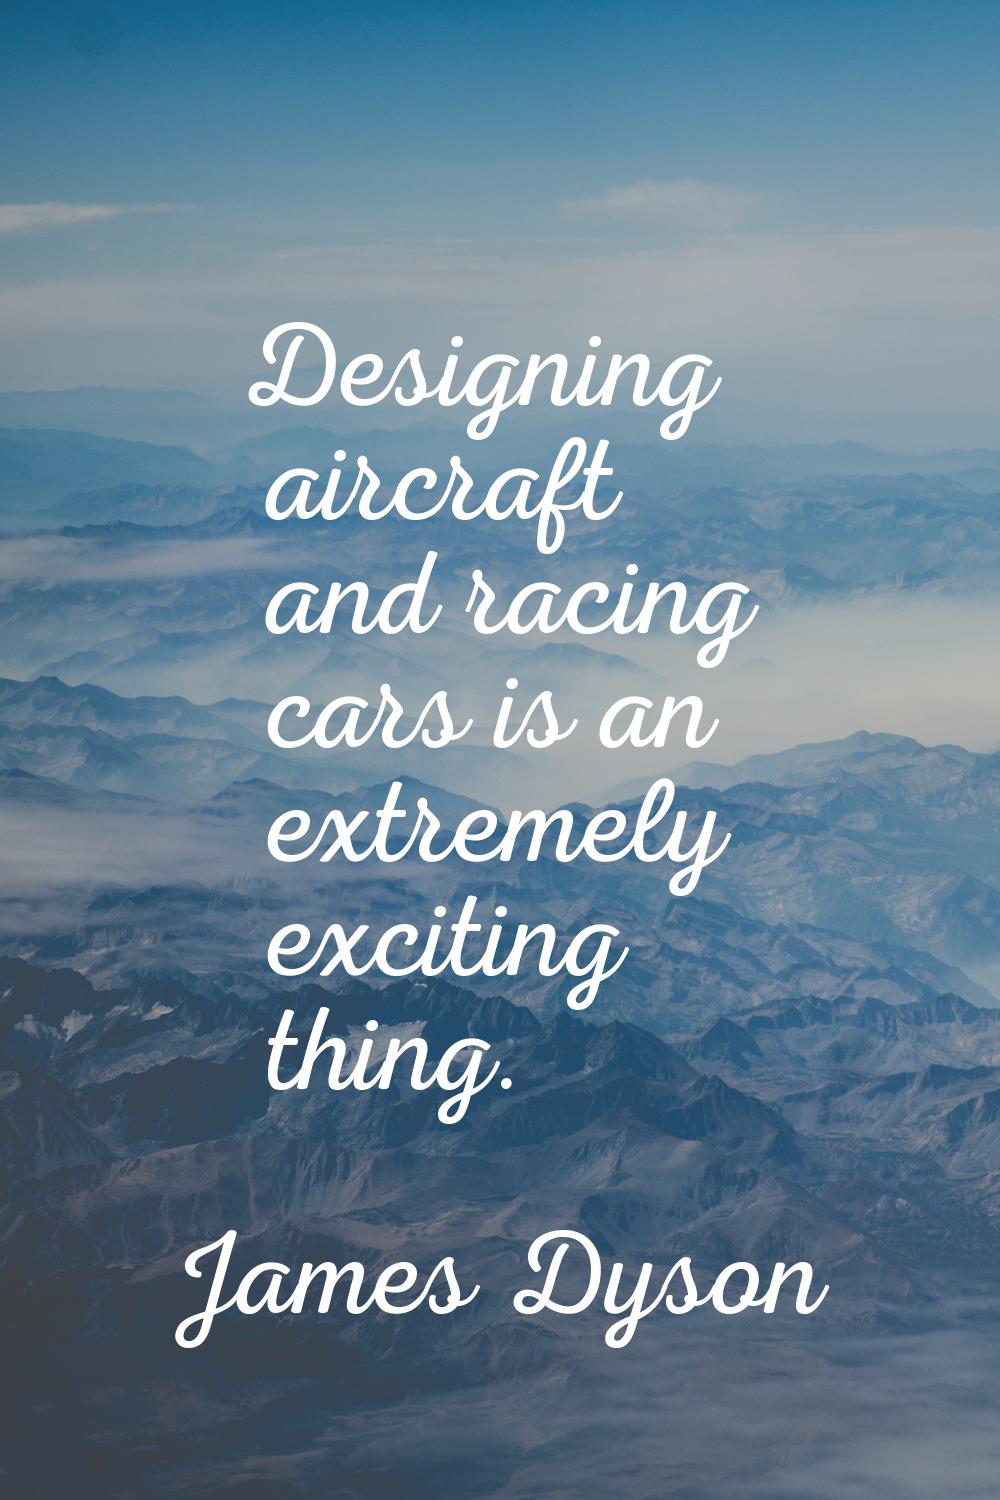 Designing aircraft and racing cars is an extremely exciting thing.